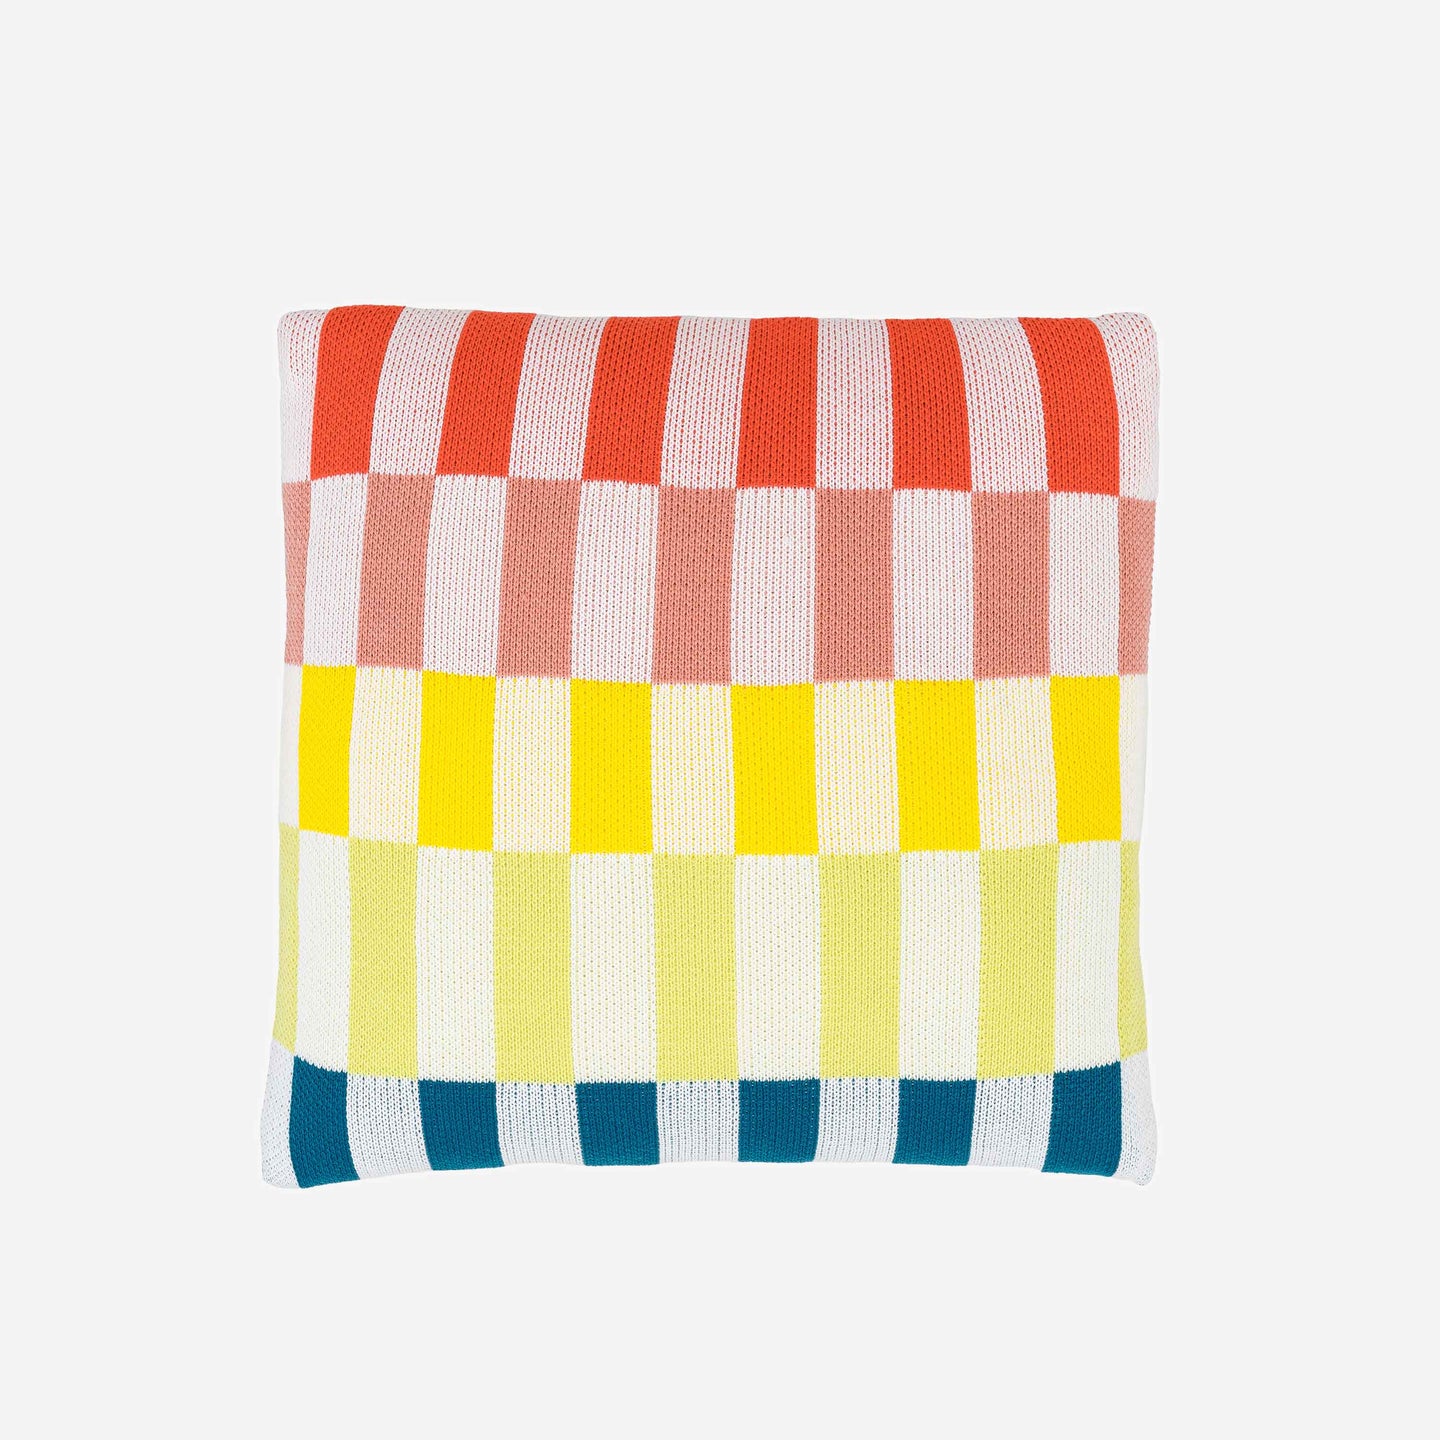  knit colored pillow cover with bright checkerboard design